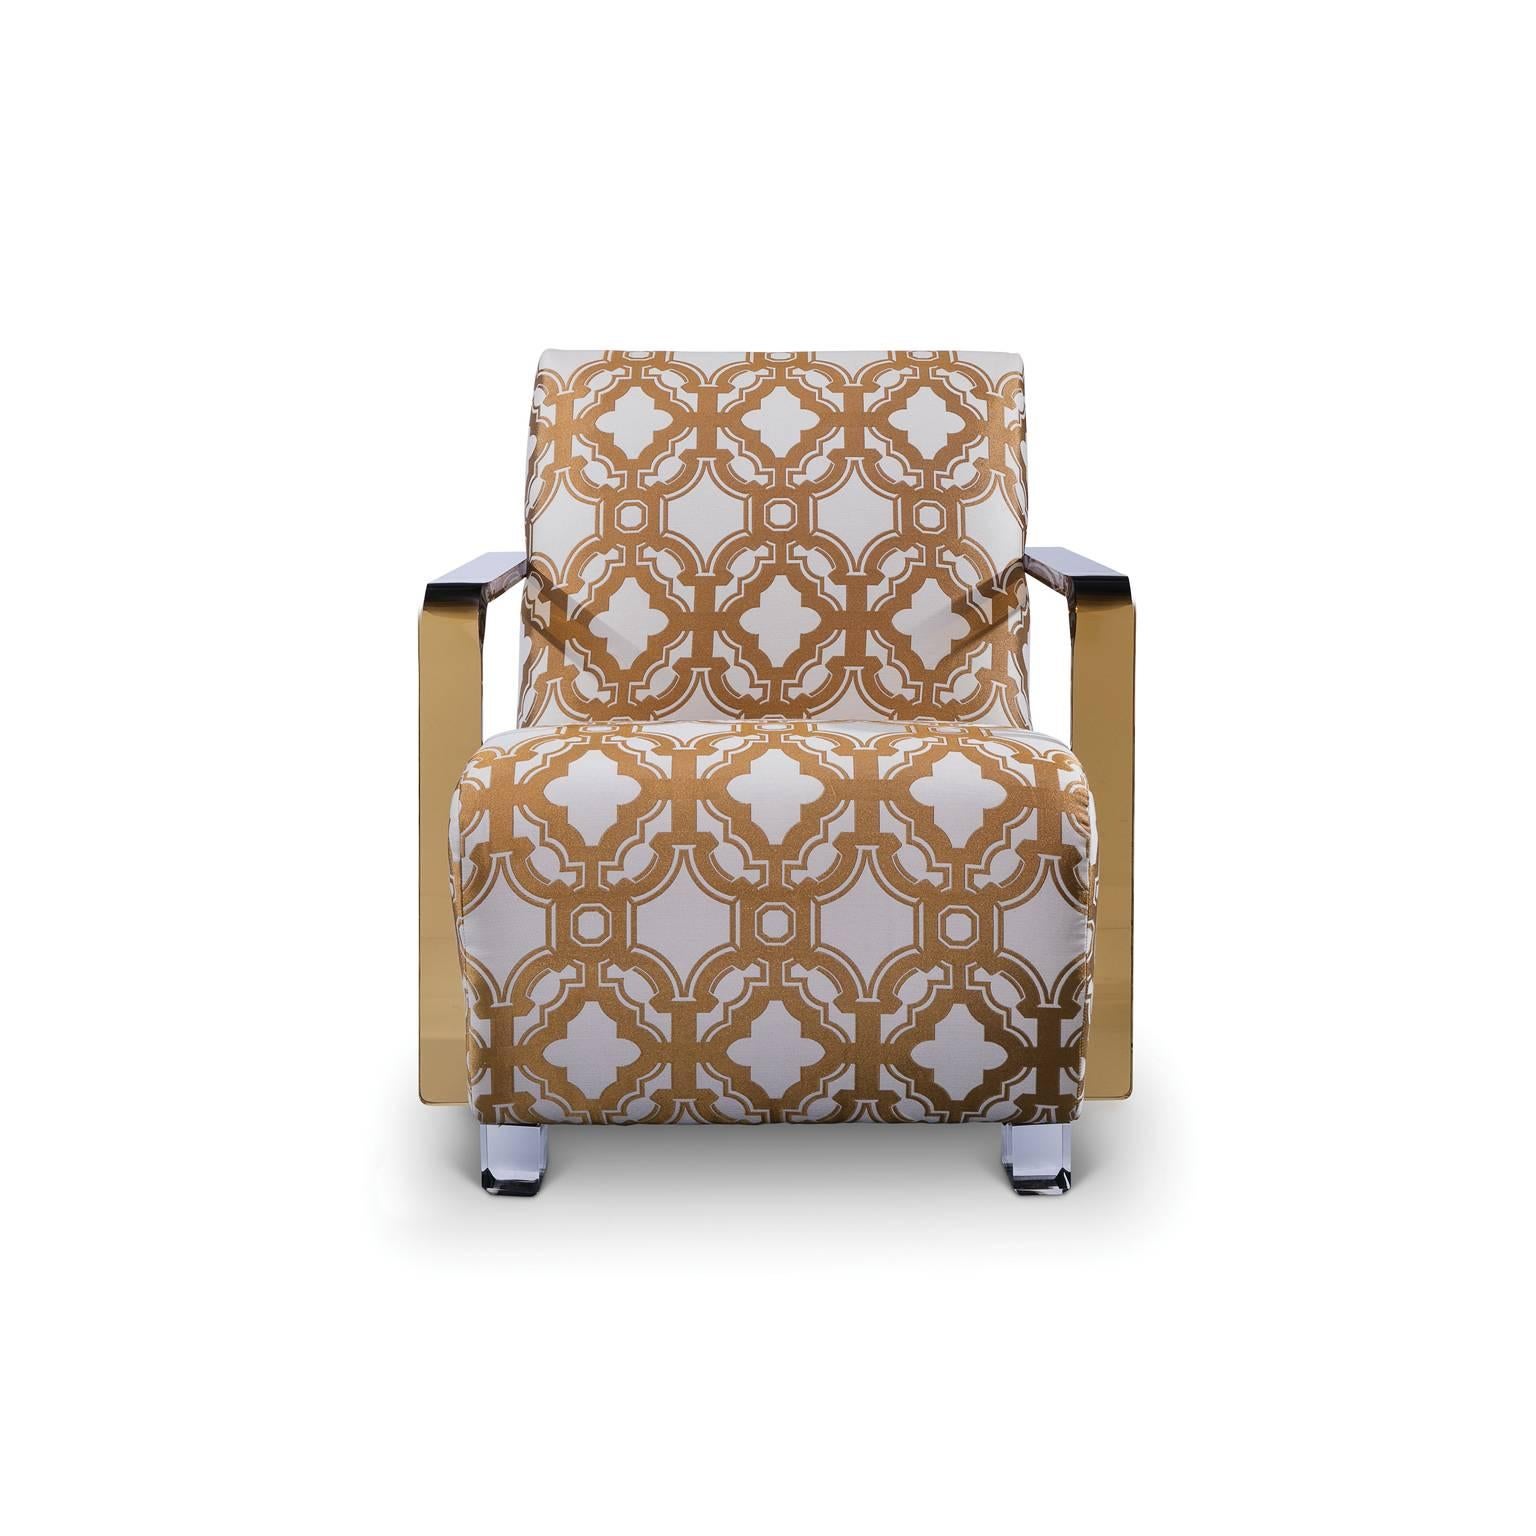 If the mythological beauty transported centuries forward for a night at Studio 54, this would be the chair representation. Gold, patterned lamé hugs the curves of the ample lounge seat, from which mirrored platforms peek. A singular acrylic piece